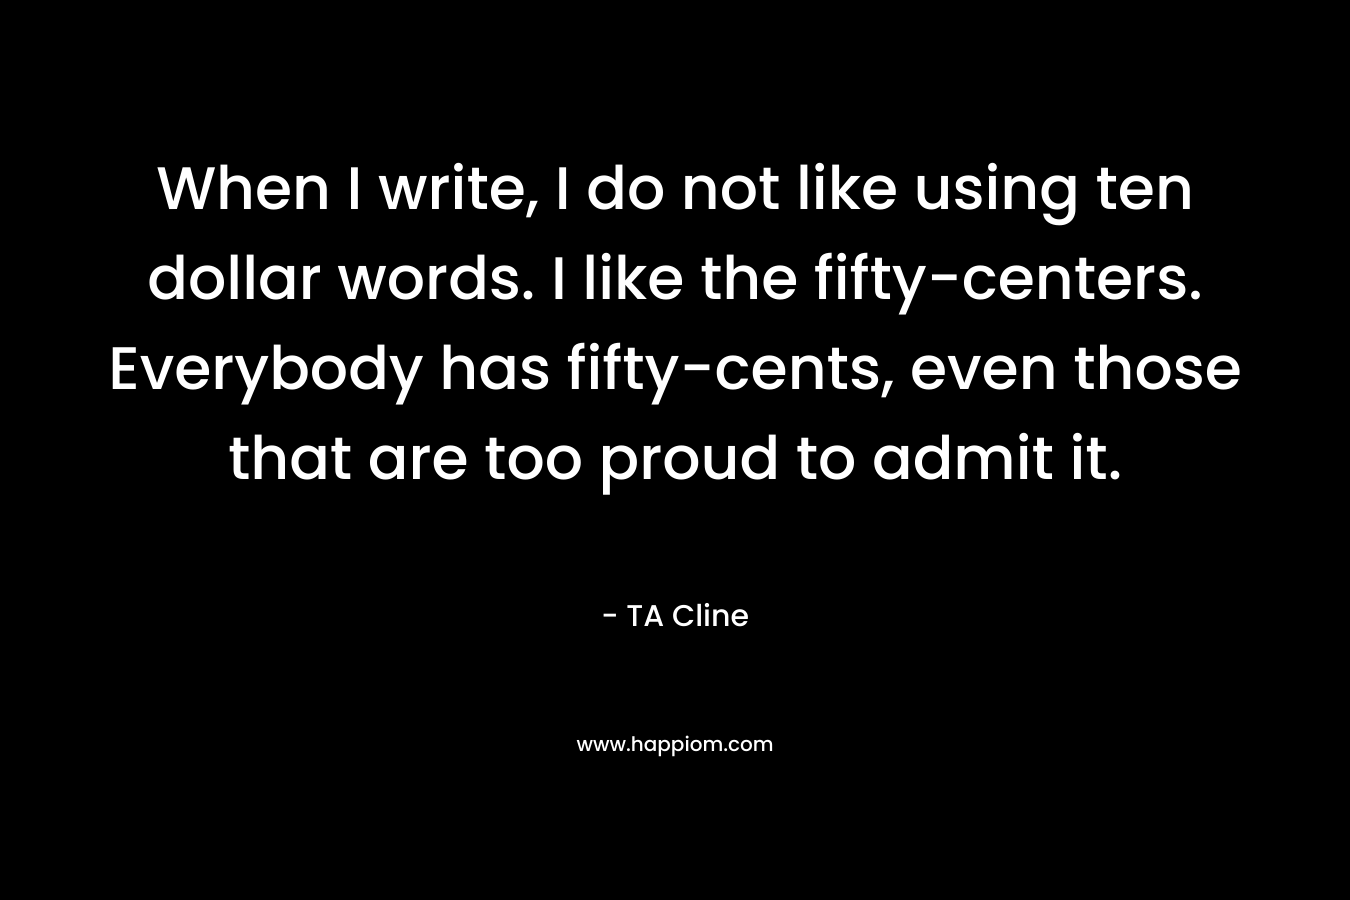 When I write, I do not like using ten dollar words. I like the fifty-centers. Everybody has fifty-cents, even those that are too proud to admit it. – TA Cline